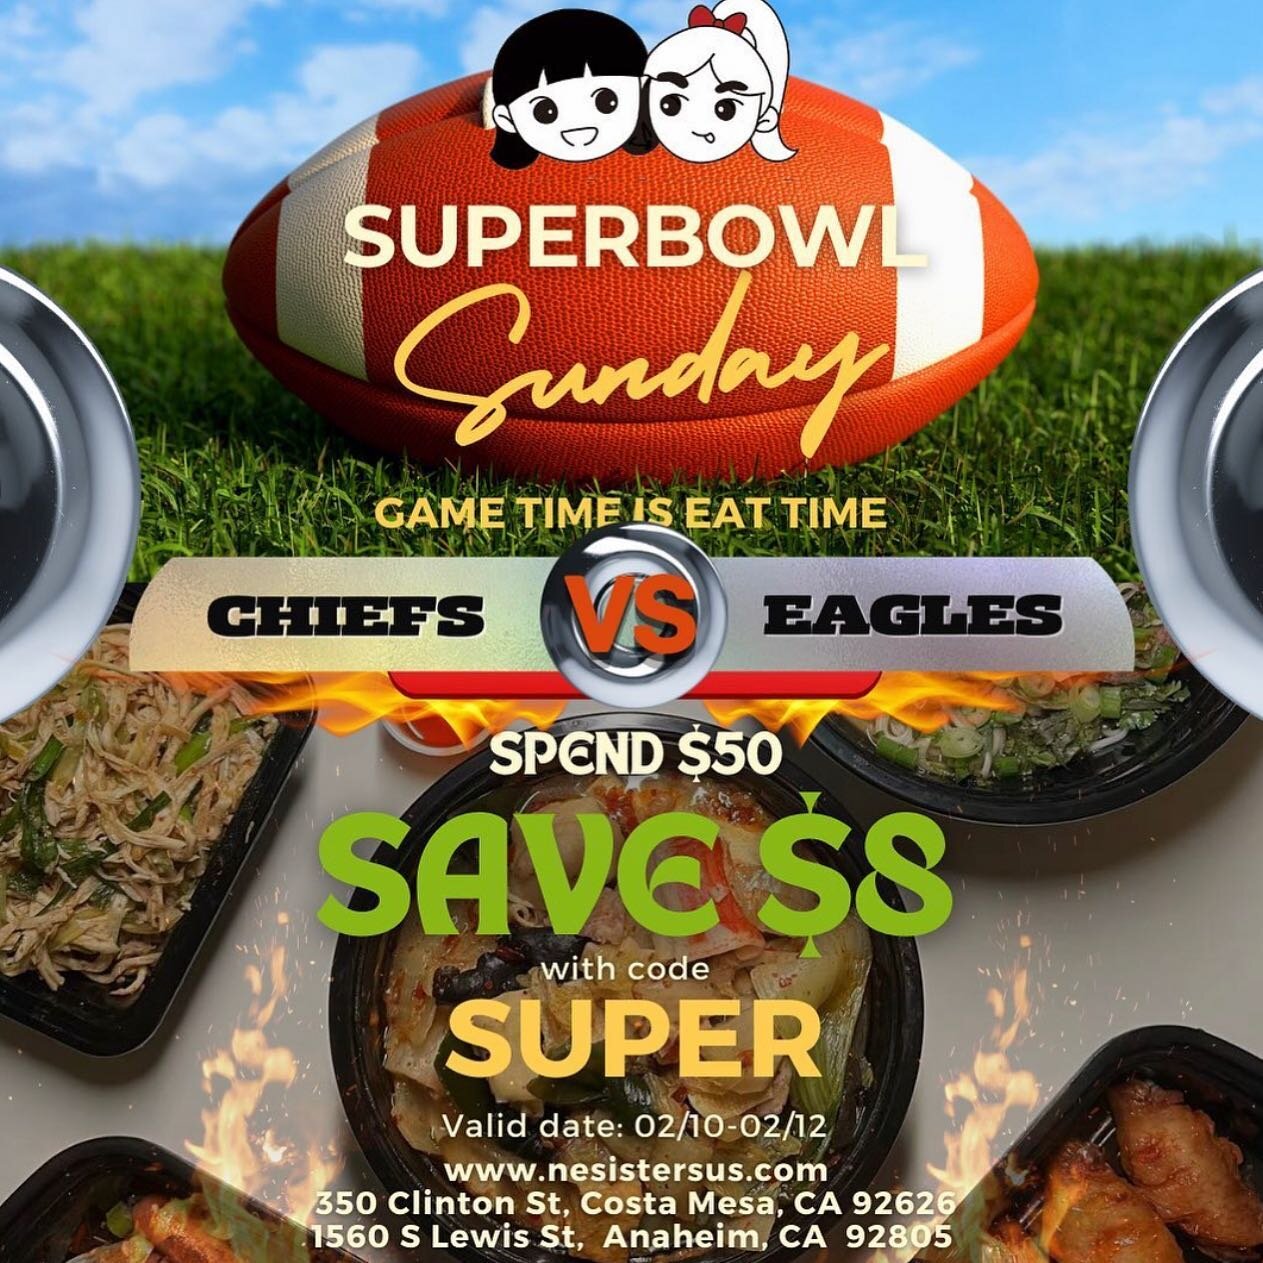 Who&rsquo;s gearing up for the big game tomorrow? 🏈 

Let&rsquo;s be real, we are all here for the food. &amp; Northeast Sisters has you covered! Save $$ on game day weekend with their limited time promo code!!

#northeastsisters #superbowlweekend #